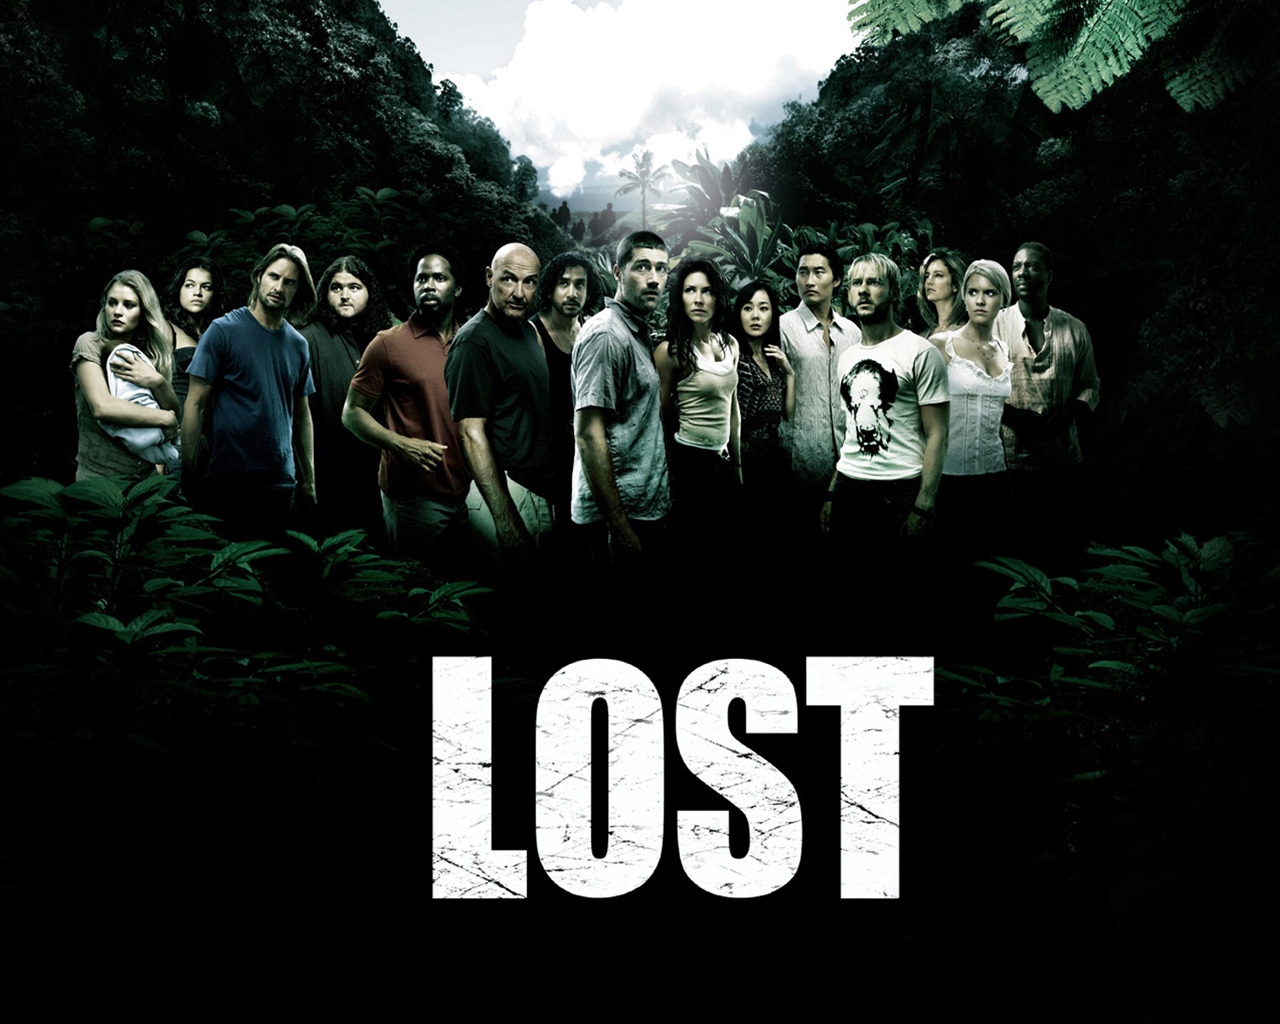 Lost Movie Group for 1280 x 1024 resolution